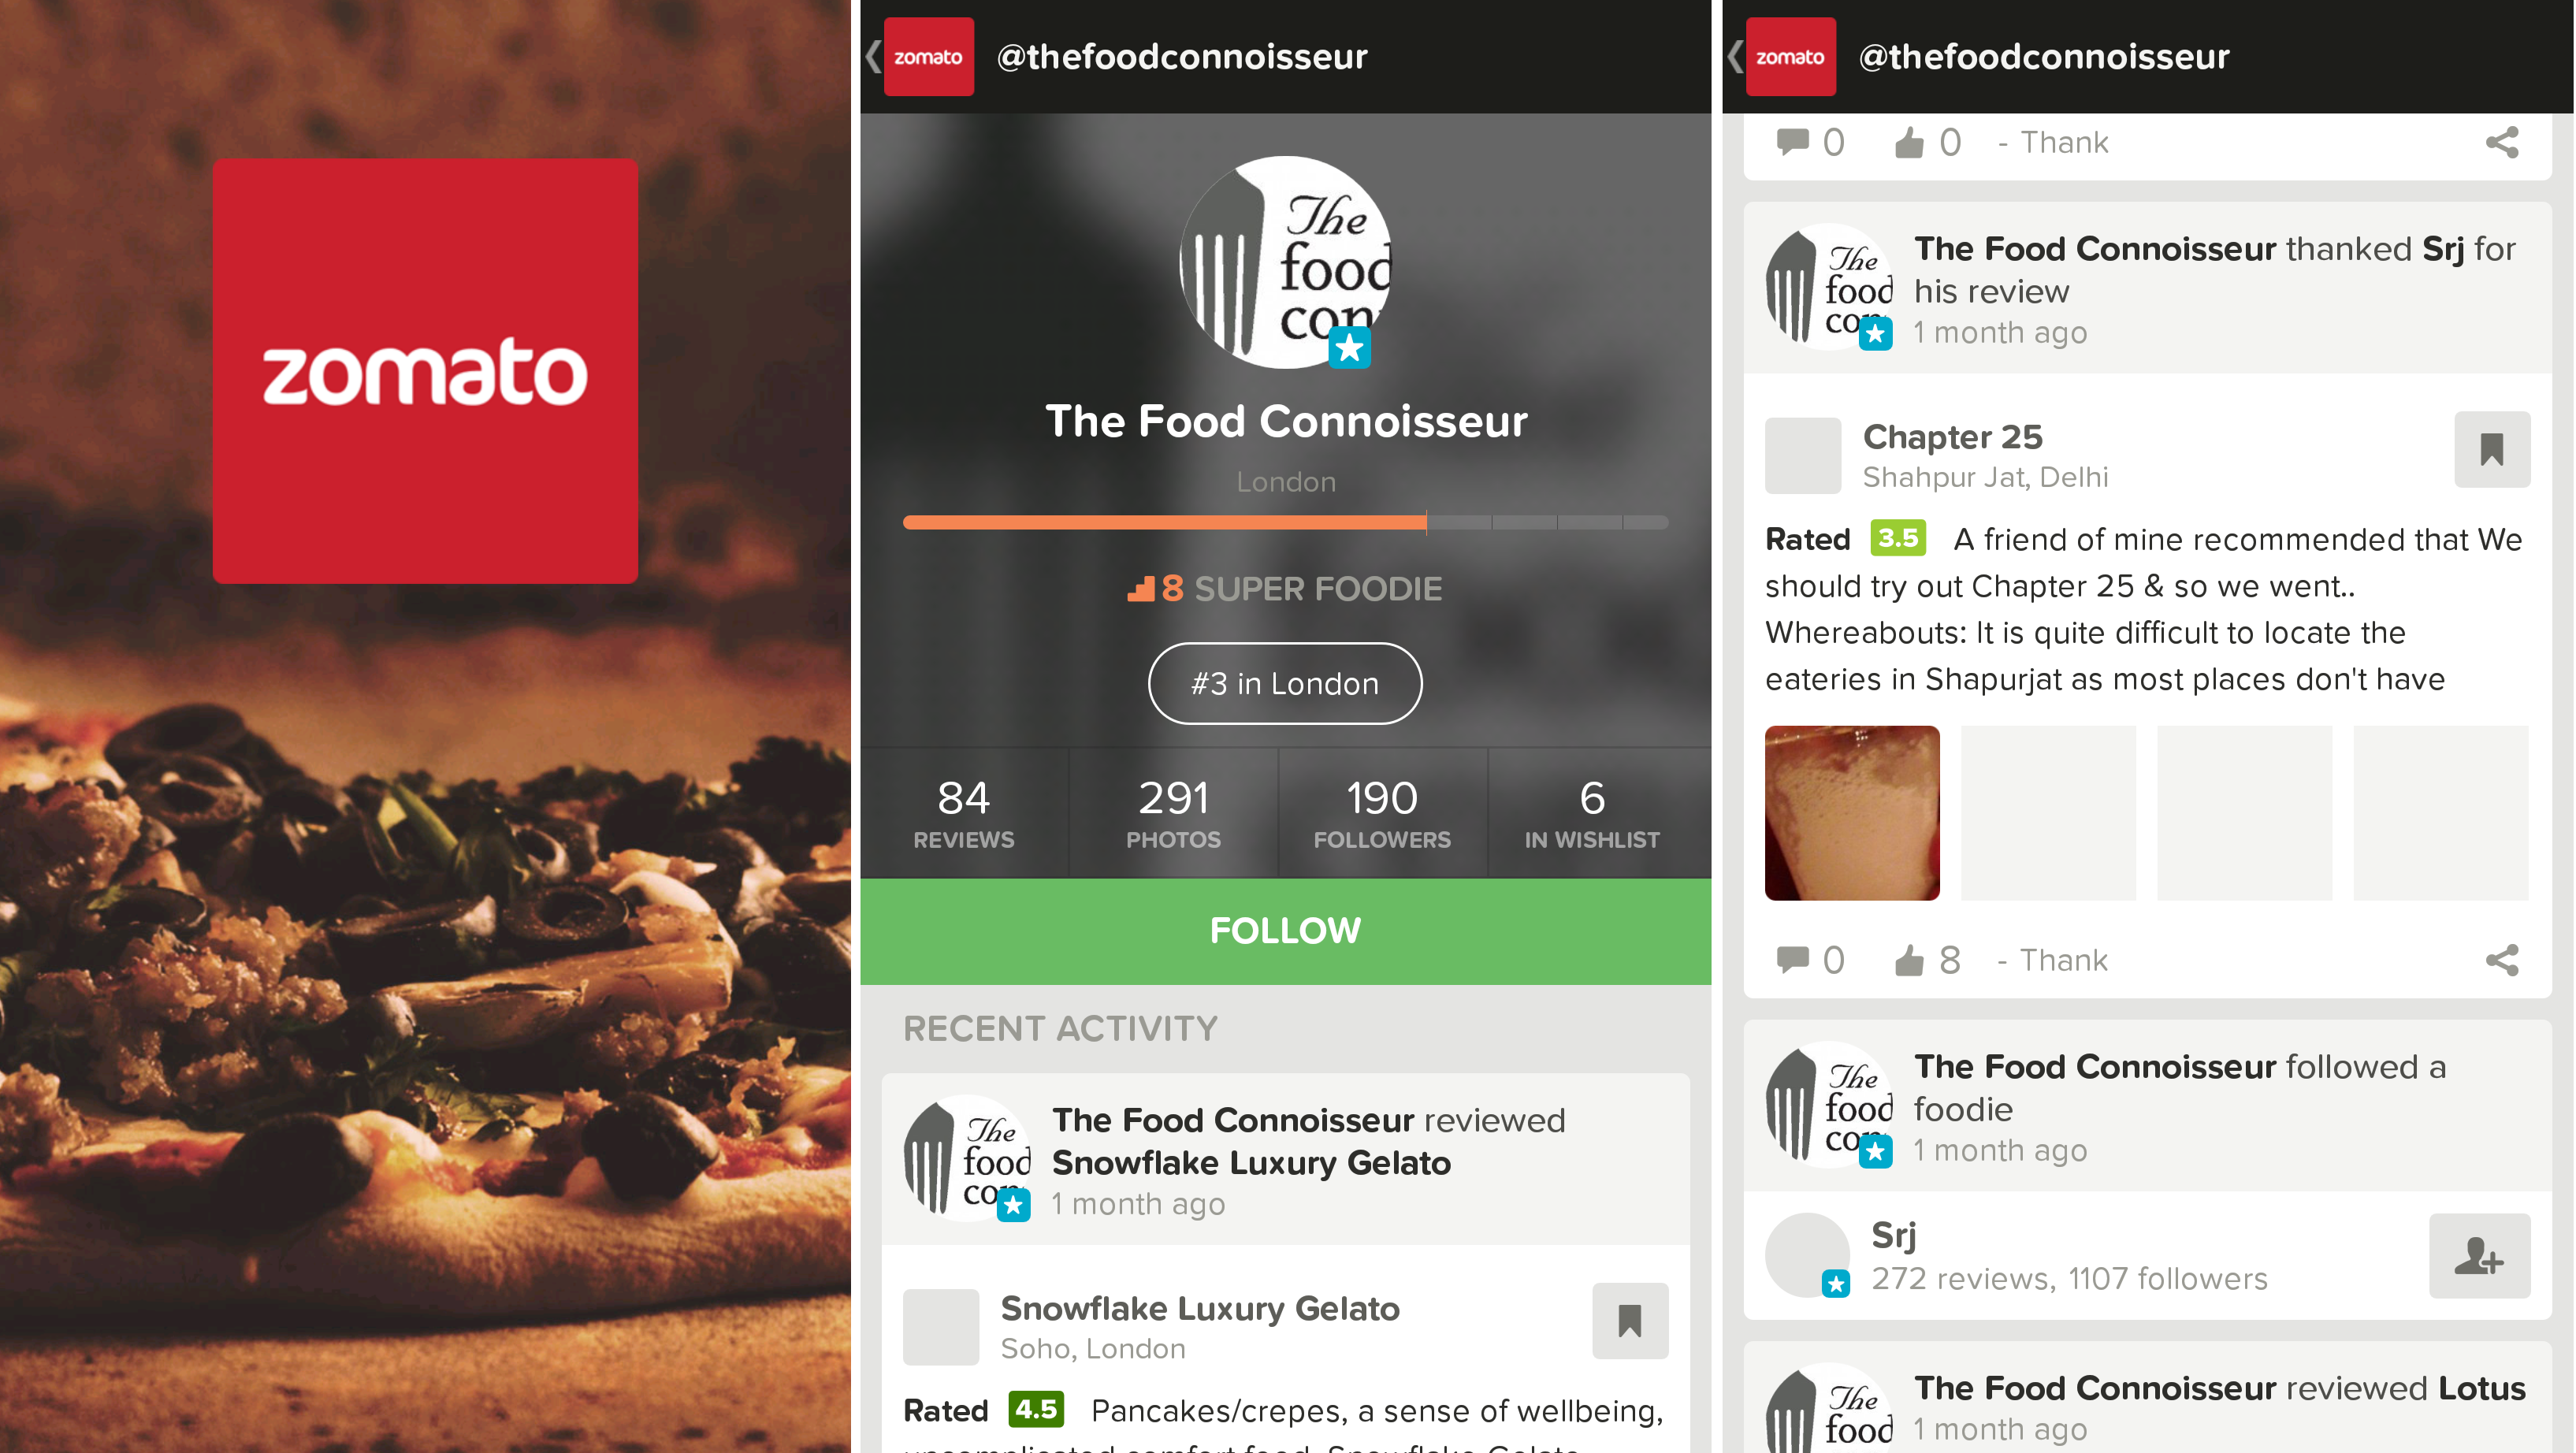 Restaurant Finder App Zomato Fully Revamped with New Social Skills